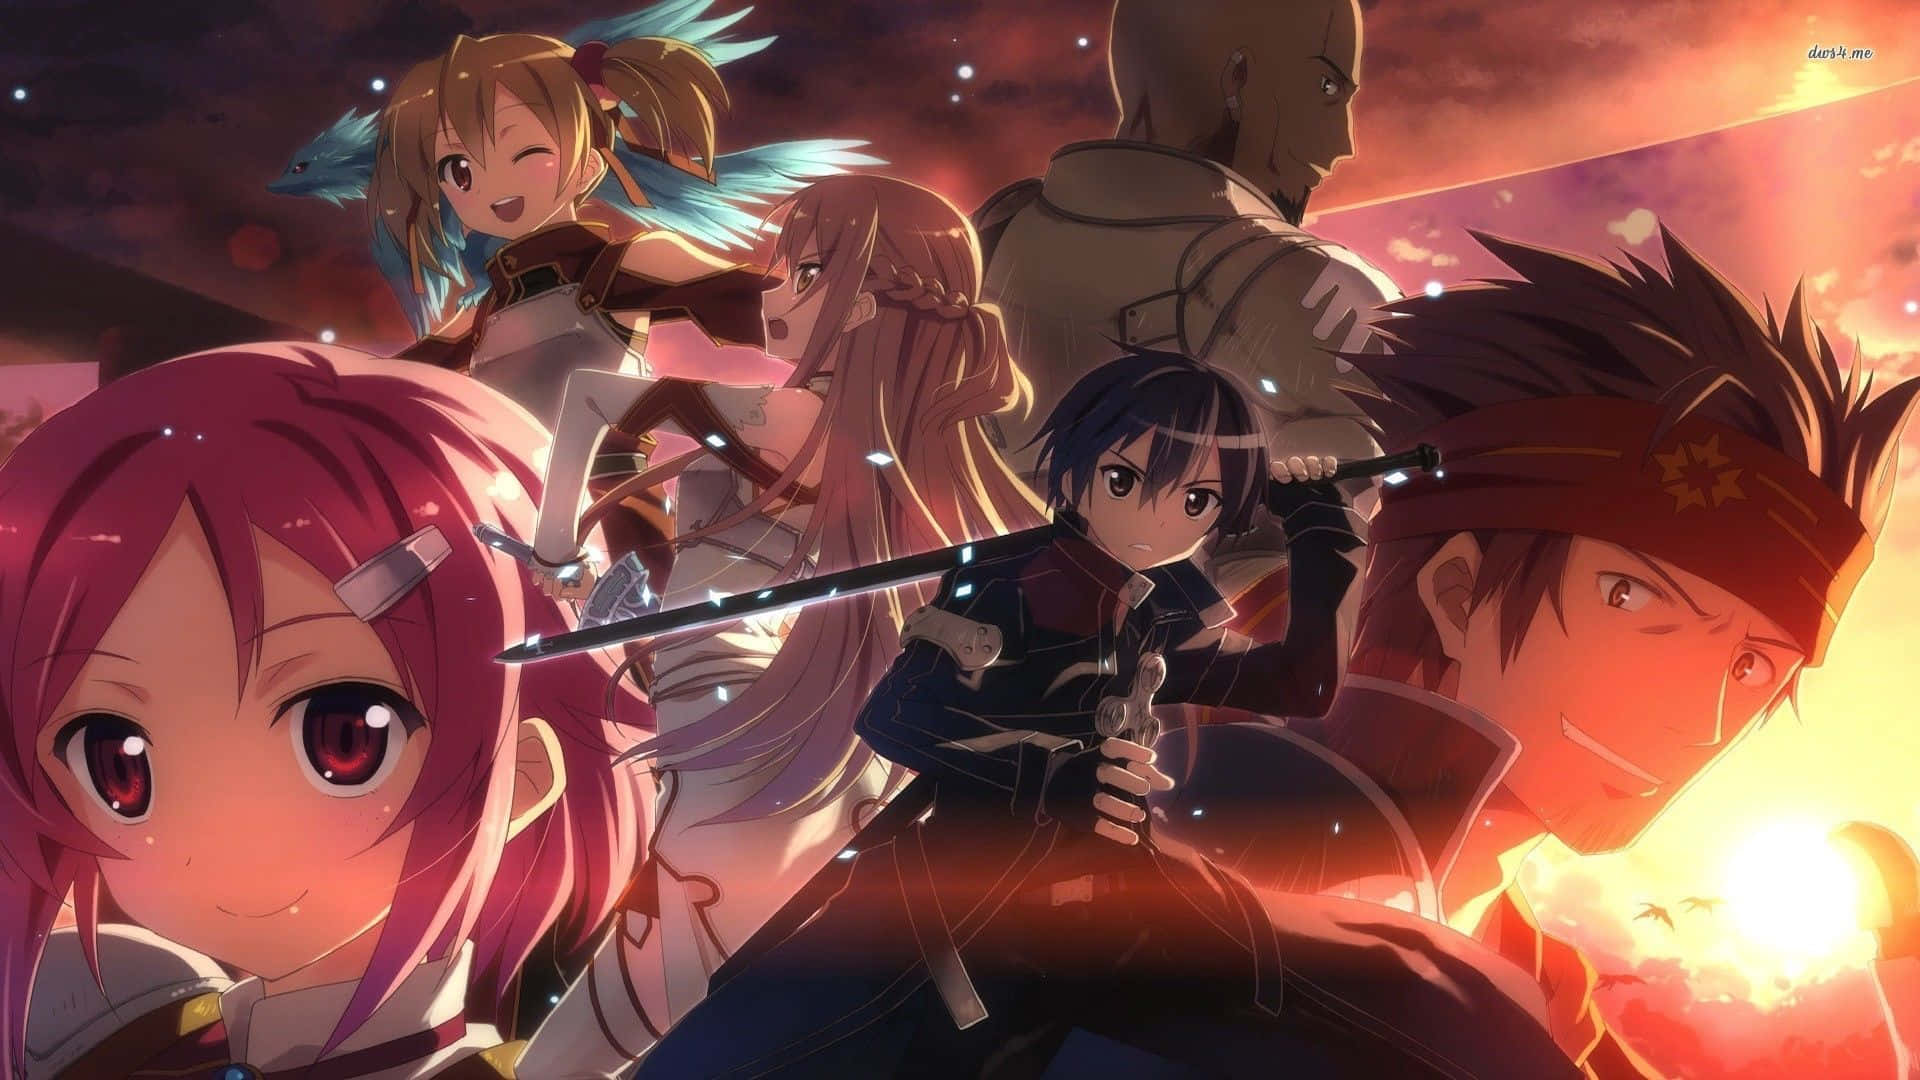 Step into the virtual world of Sword Art Online